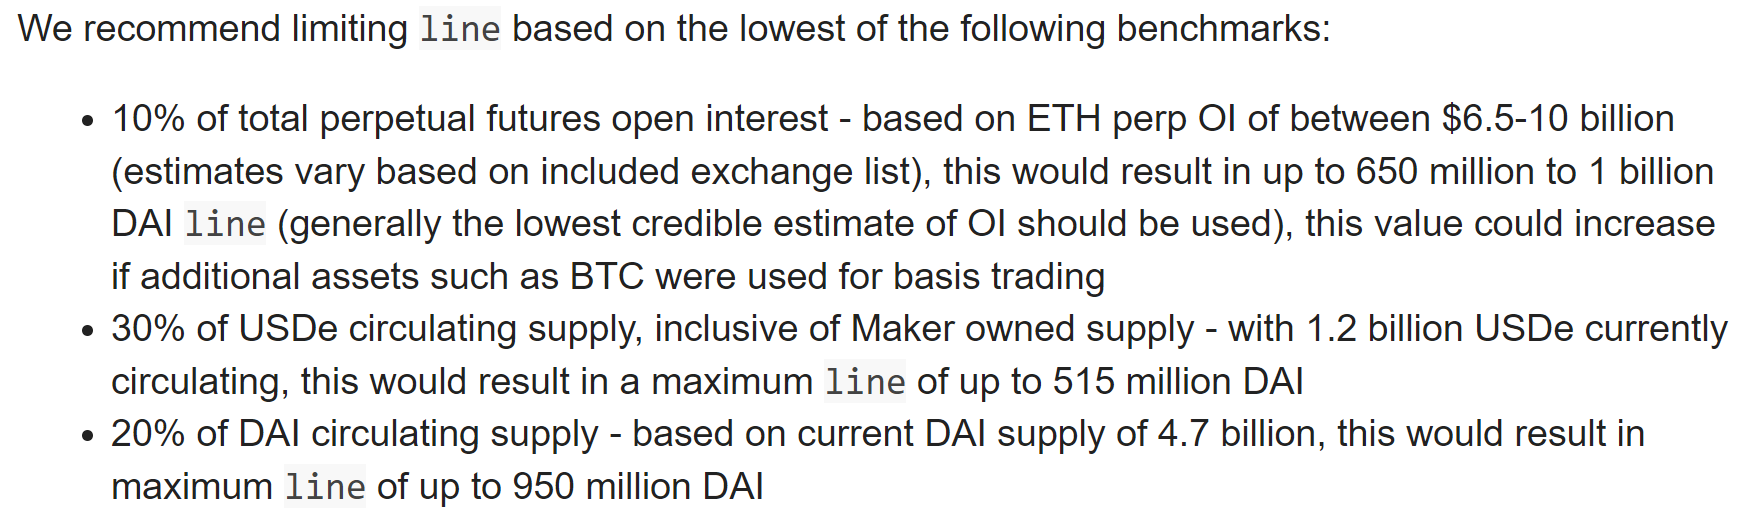 Excerpt of BA Labs' recommendation in the Risk Assessment - USDe Morpho Lending Integration post on the MakerDAO forum